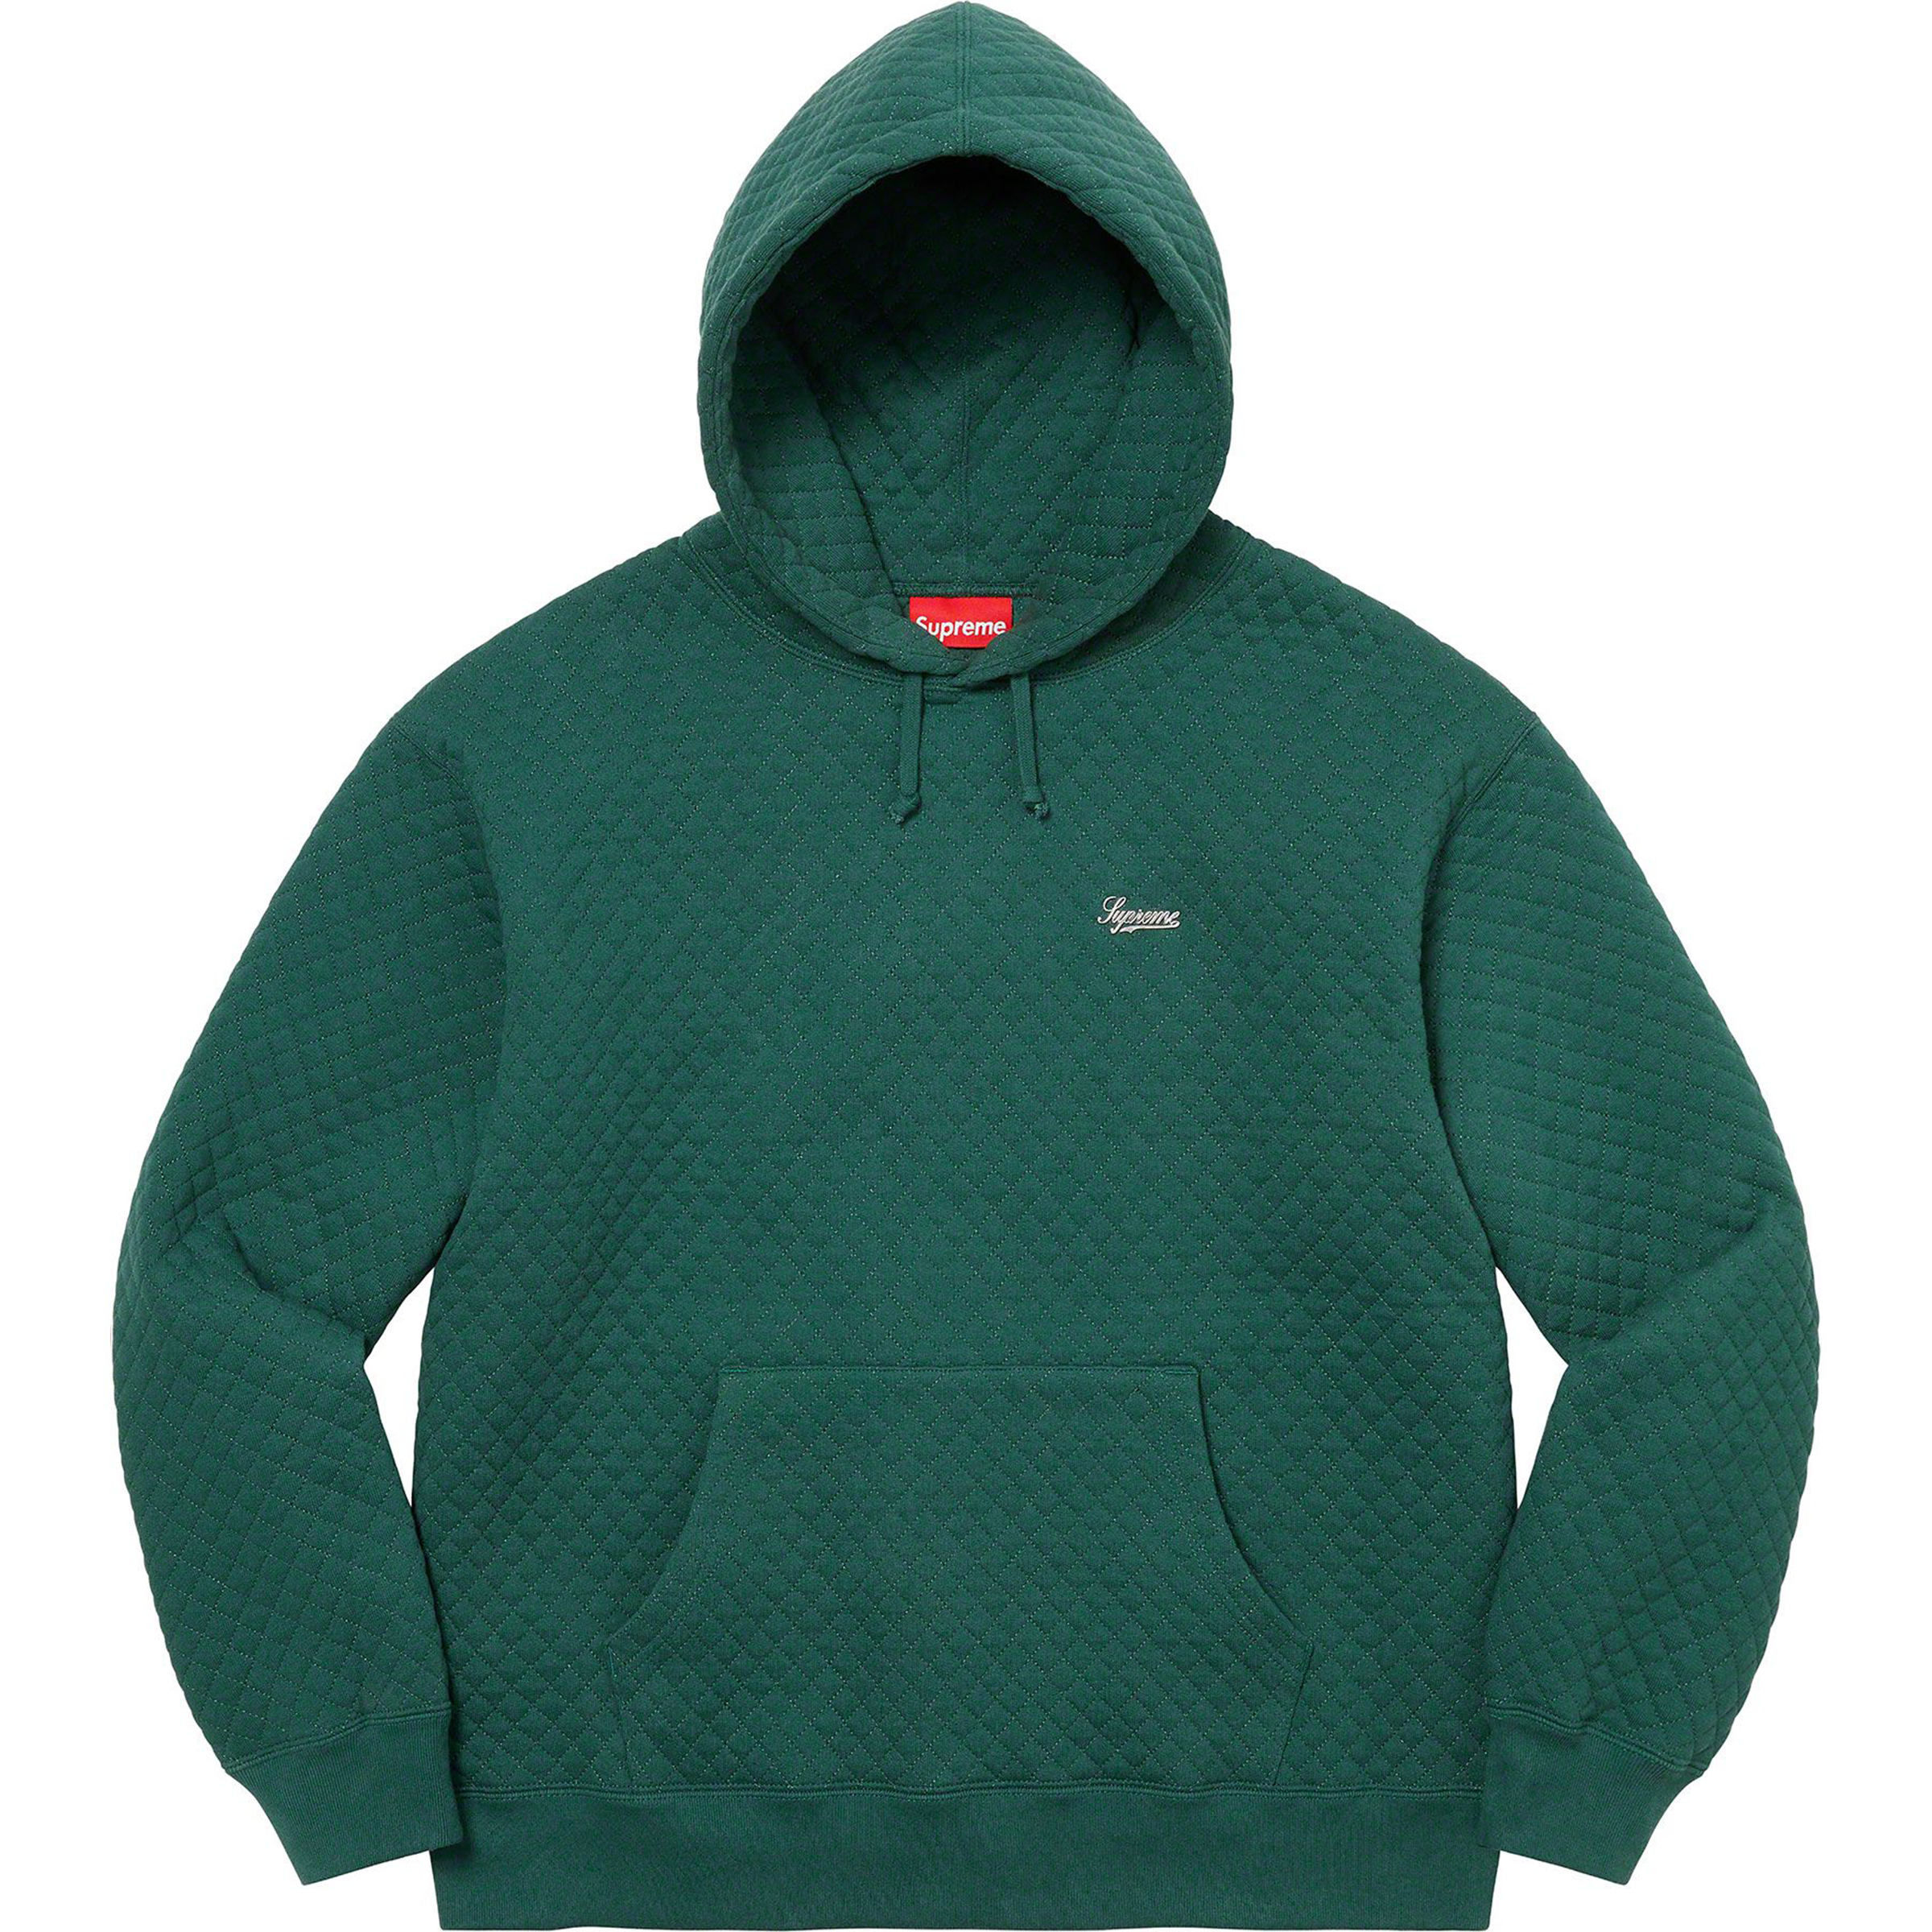 Supreme "Micro Quilted" - Hooded Sweatshirt